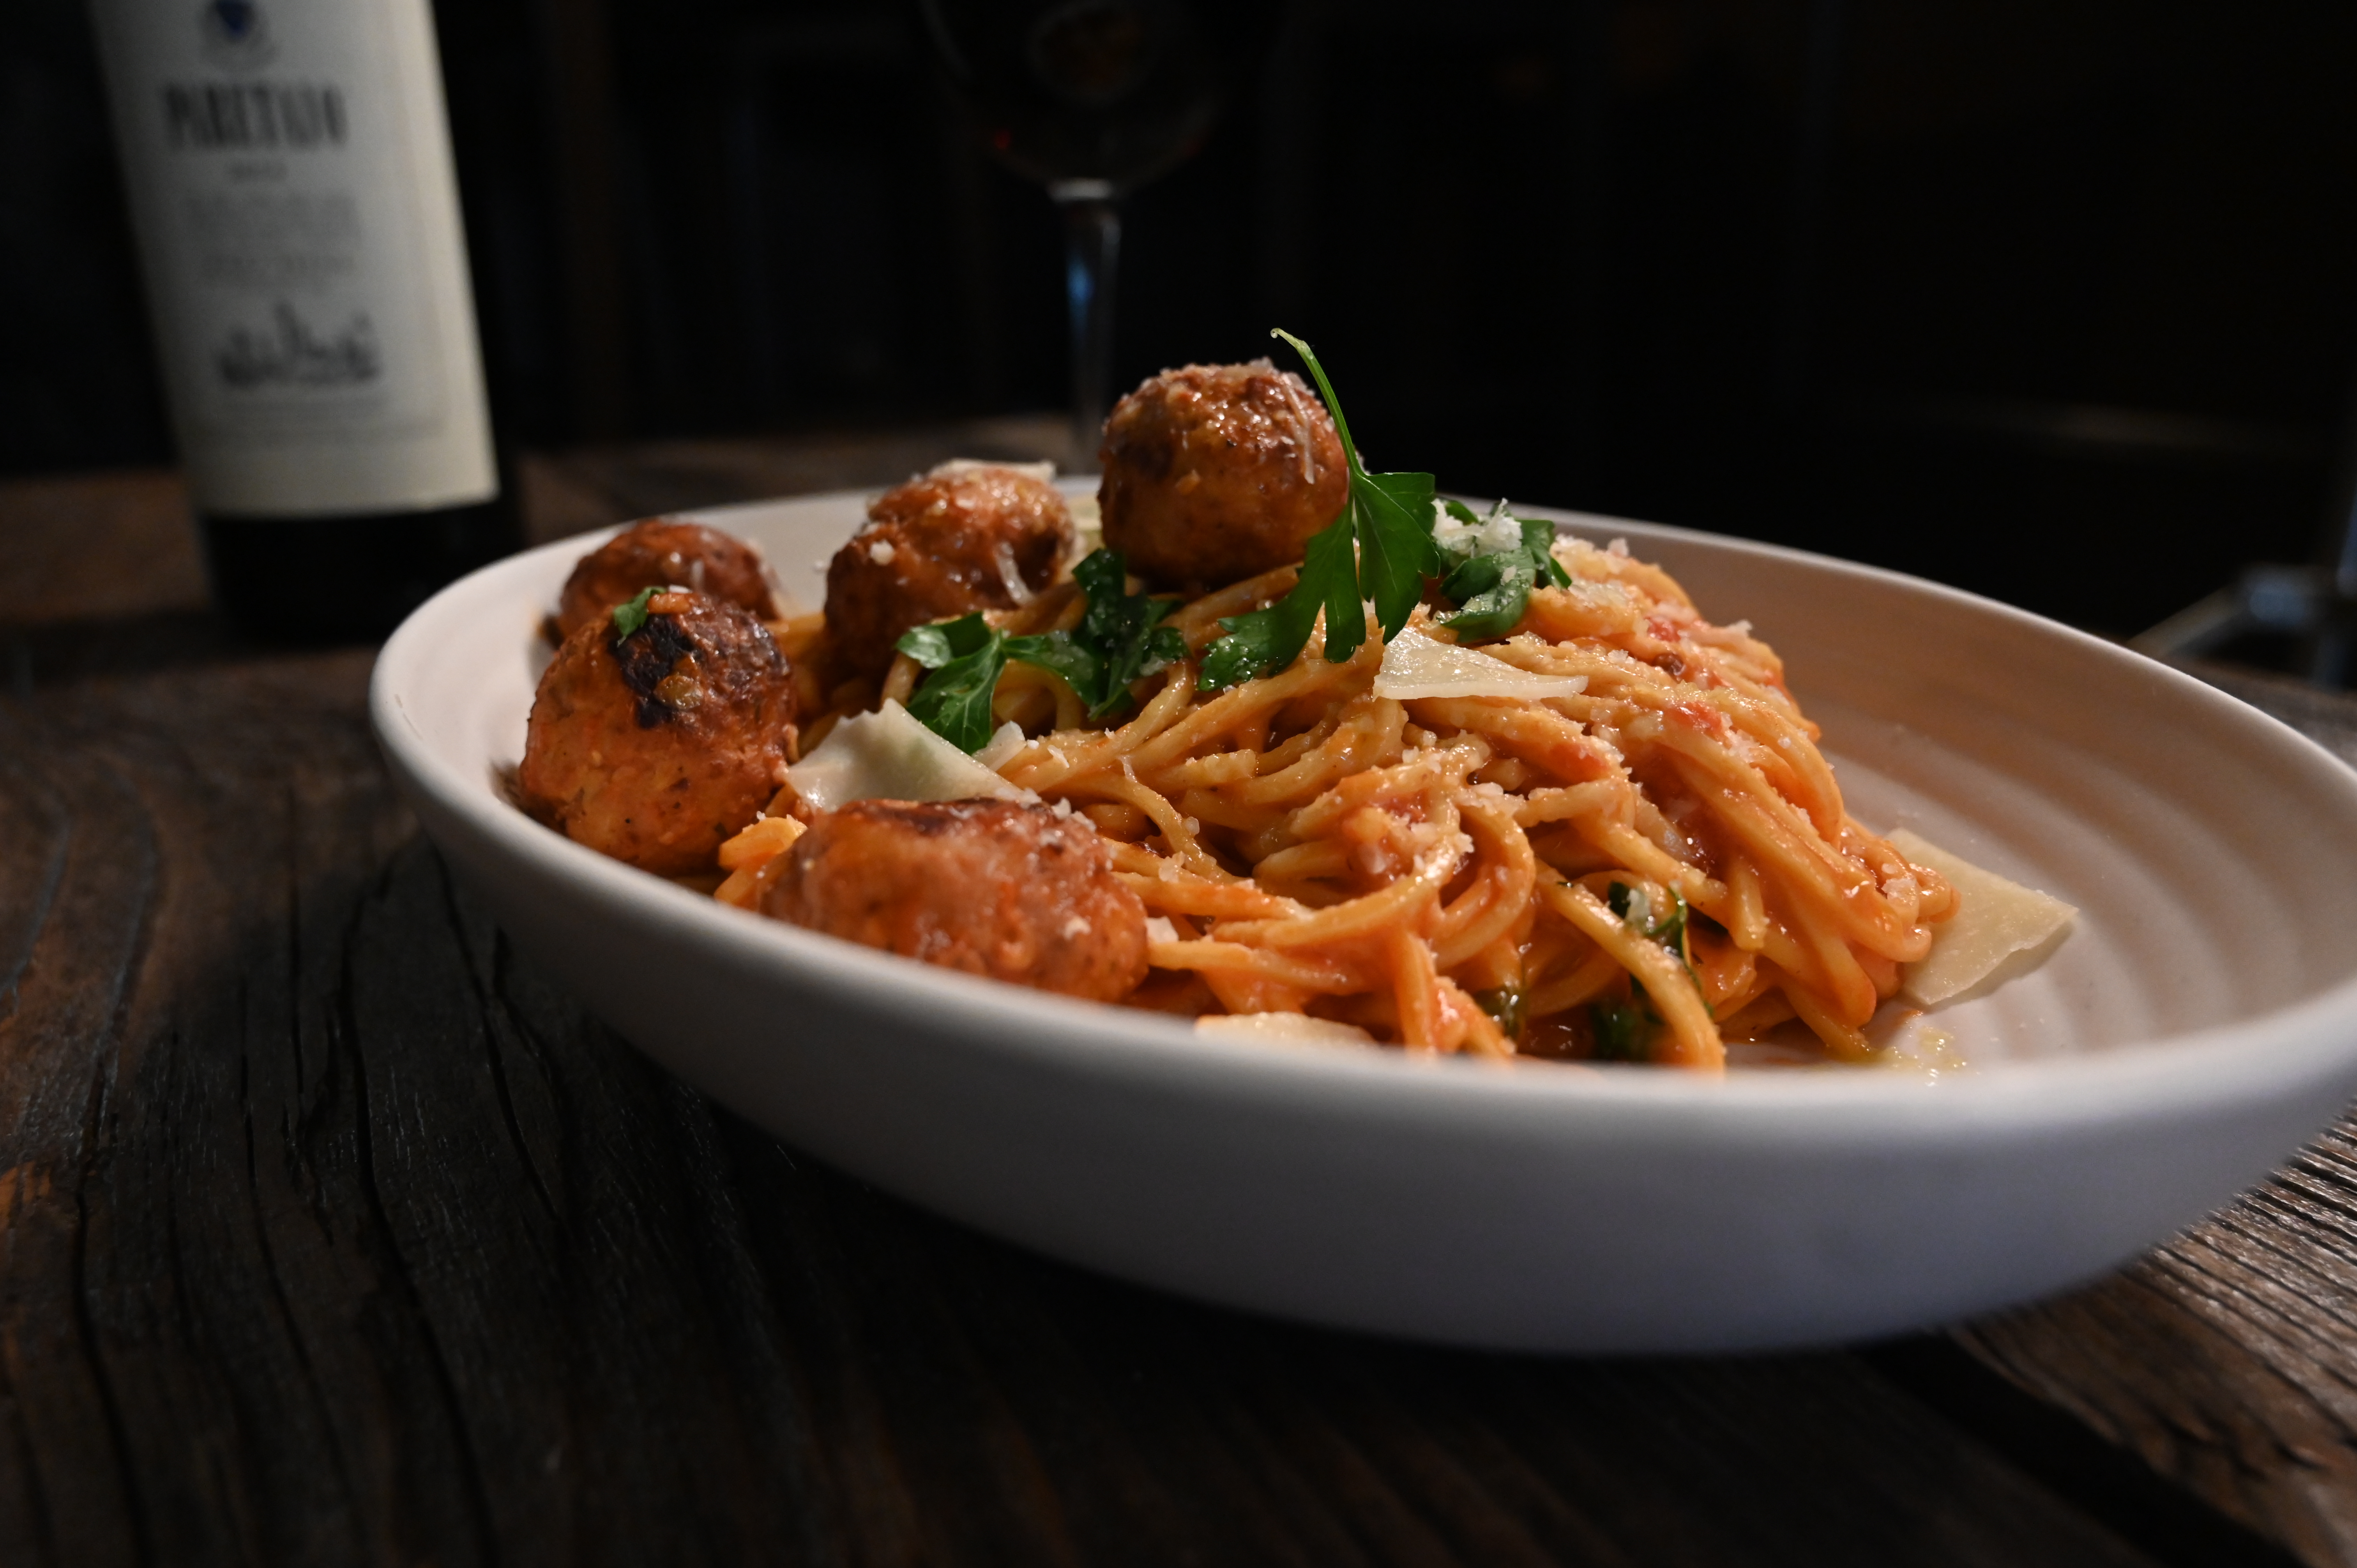 This is a photo of Posto Italian's pasta with meatballs